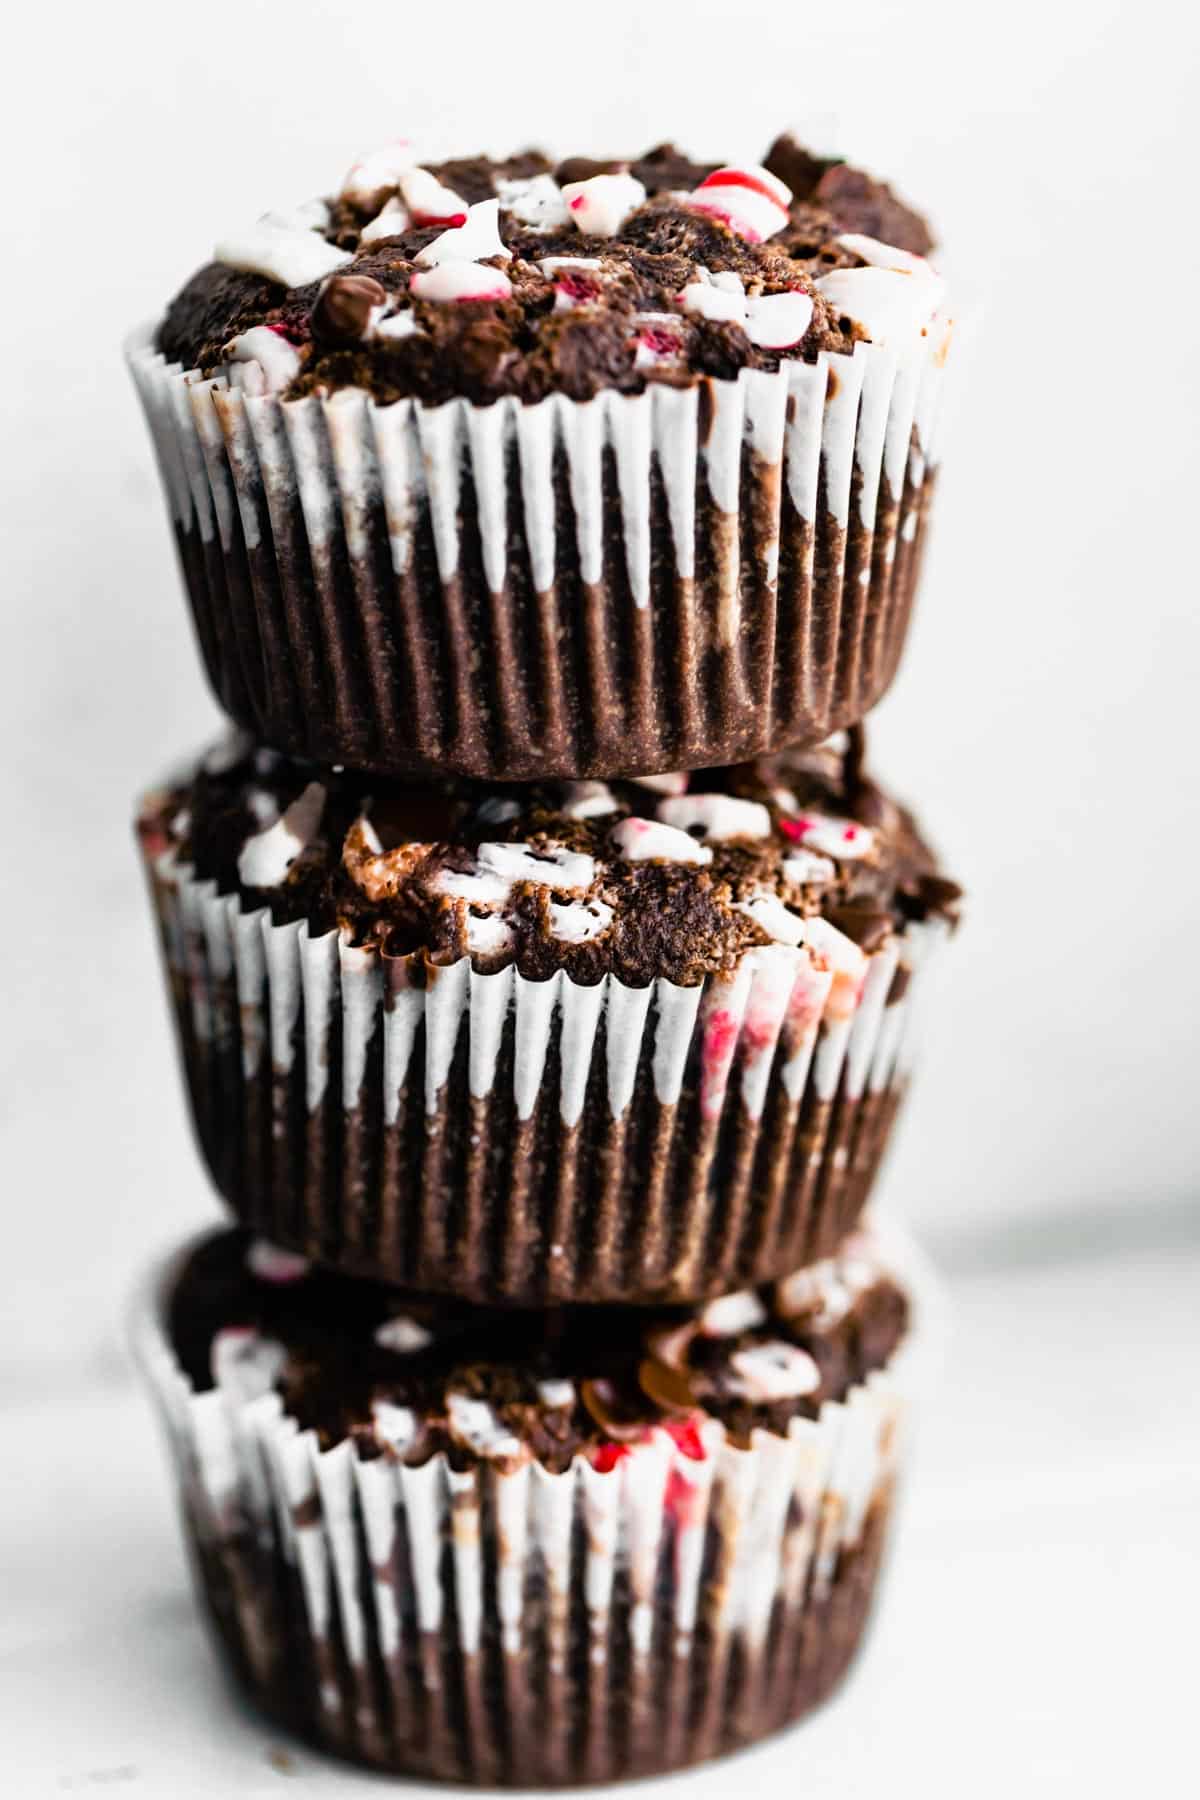 A stack of three gluten free Peppermint Chocolate Muffins on a white countertop.